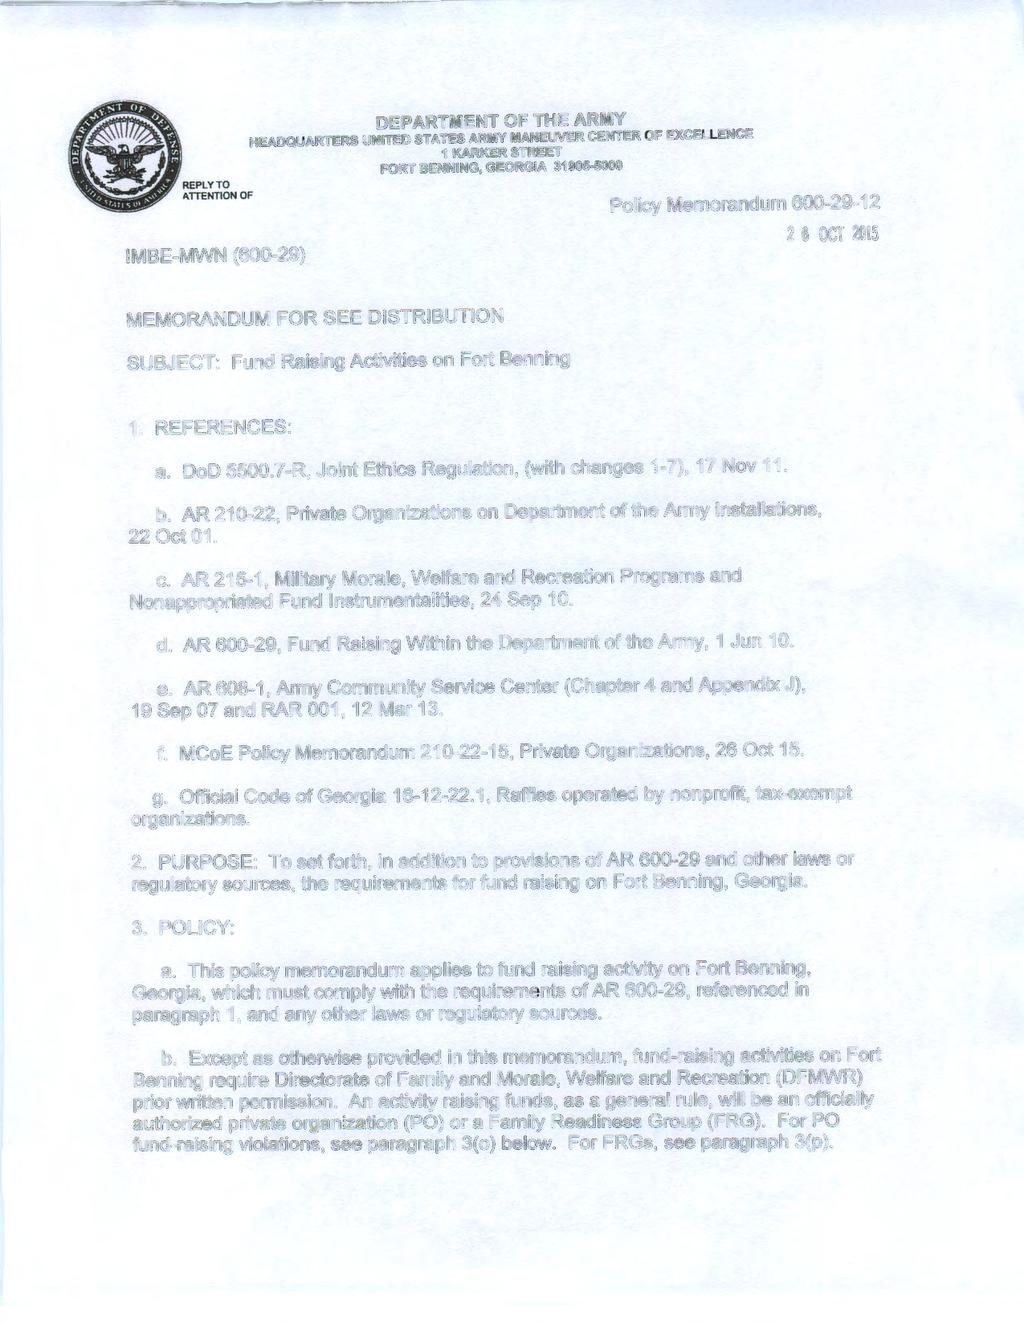 REPLY TO "T'T NT10N OF IMBE-MWN (600-29) DEPARTMENT OF THE ARMY HEADQUARTERS UNITED STA TES ARMY MANEUVER CENTER OF EXCELLENCE 1 KARKER STREET FORT BENNING, GEORGIA 31905-5000 Policy Memorandum